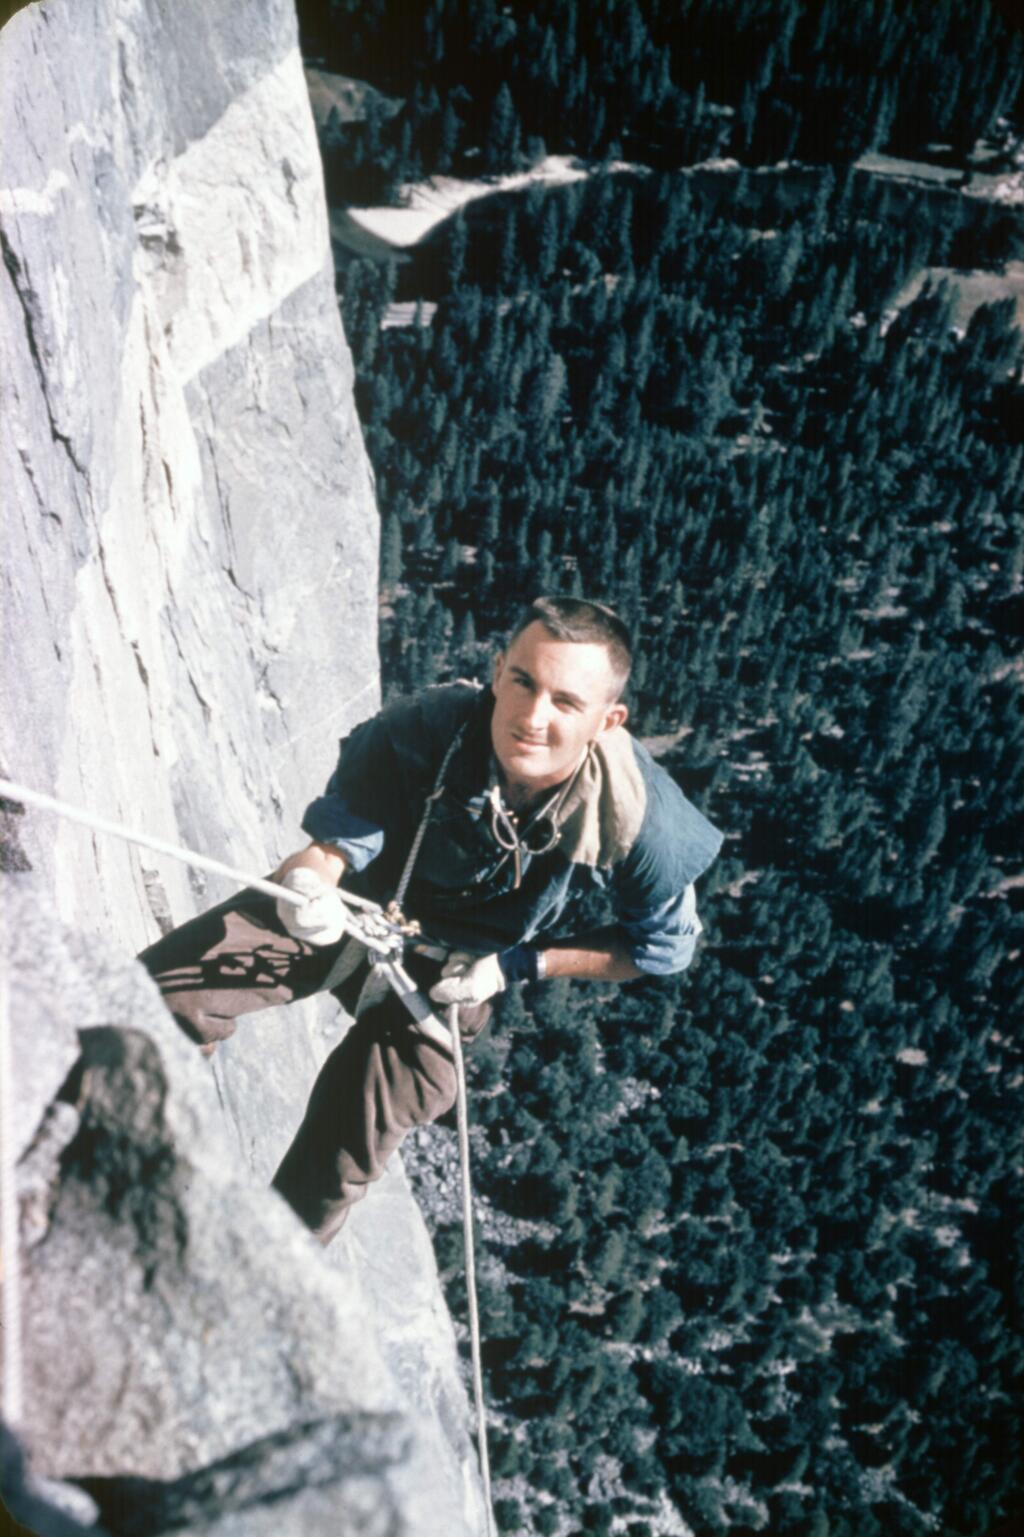 Wayne Merry of Calistoga inches his way upward to the top of El Capitan in November 1958. Perry and his partners were the first to scale the mountain in Yosemite. (Yosemite Climbing Association photo)